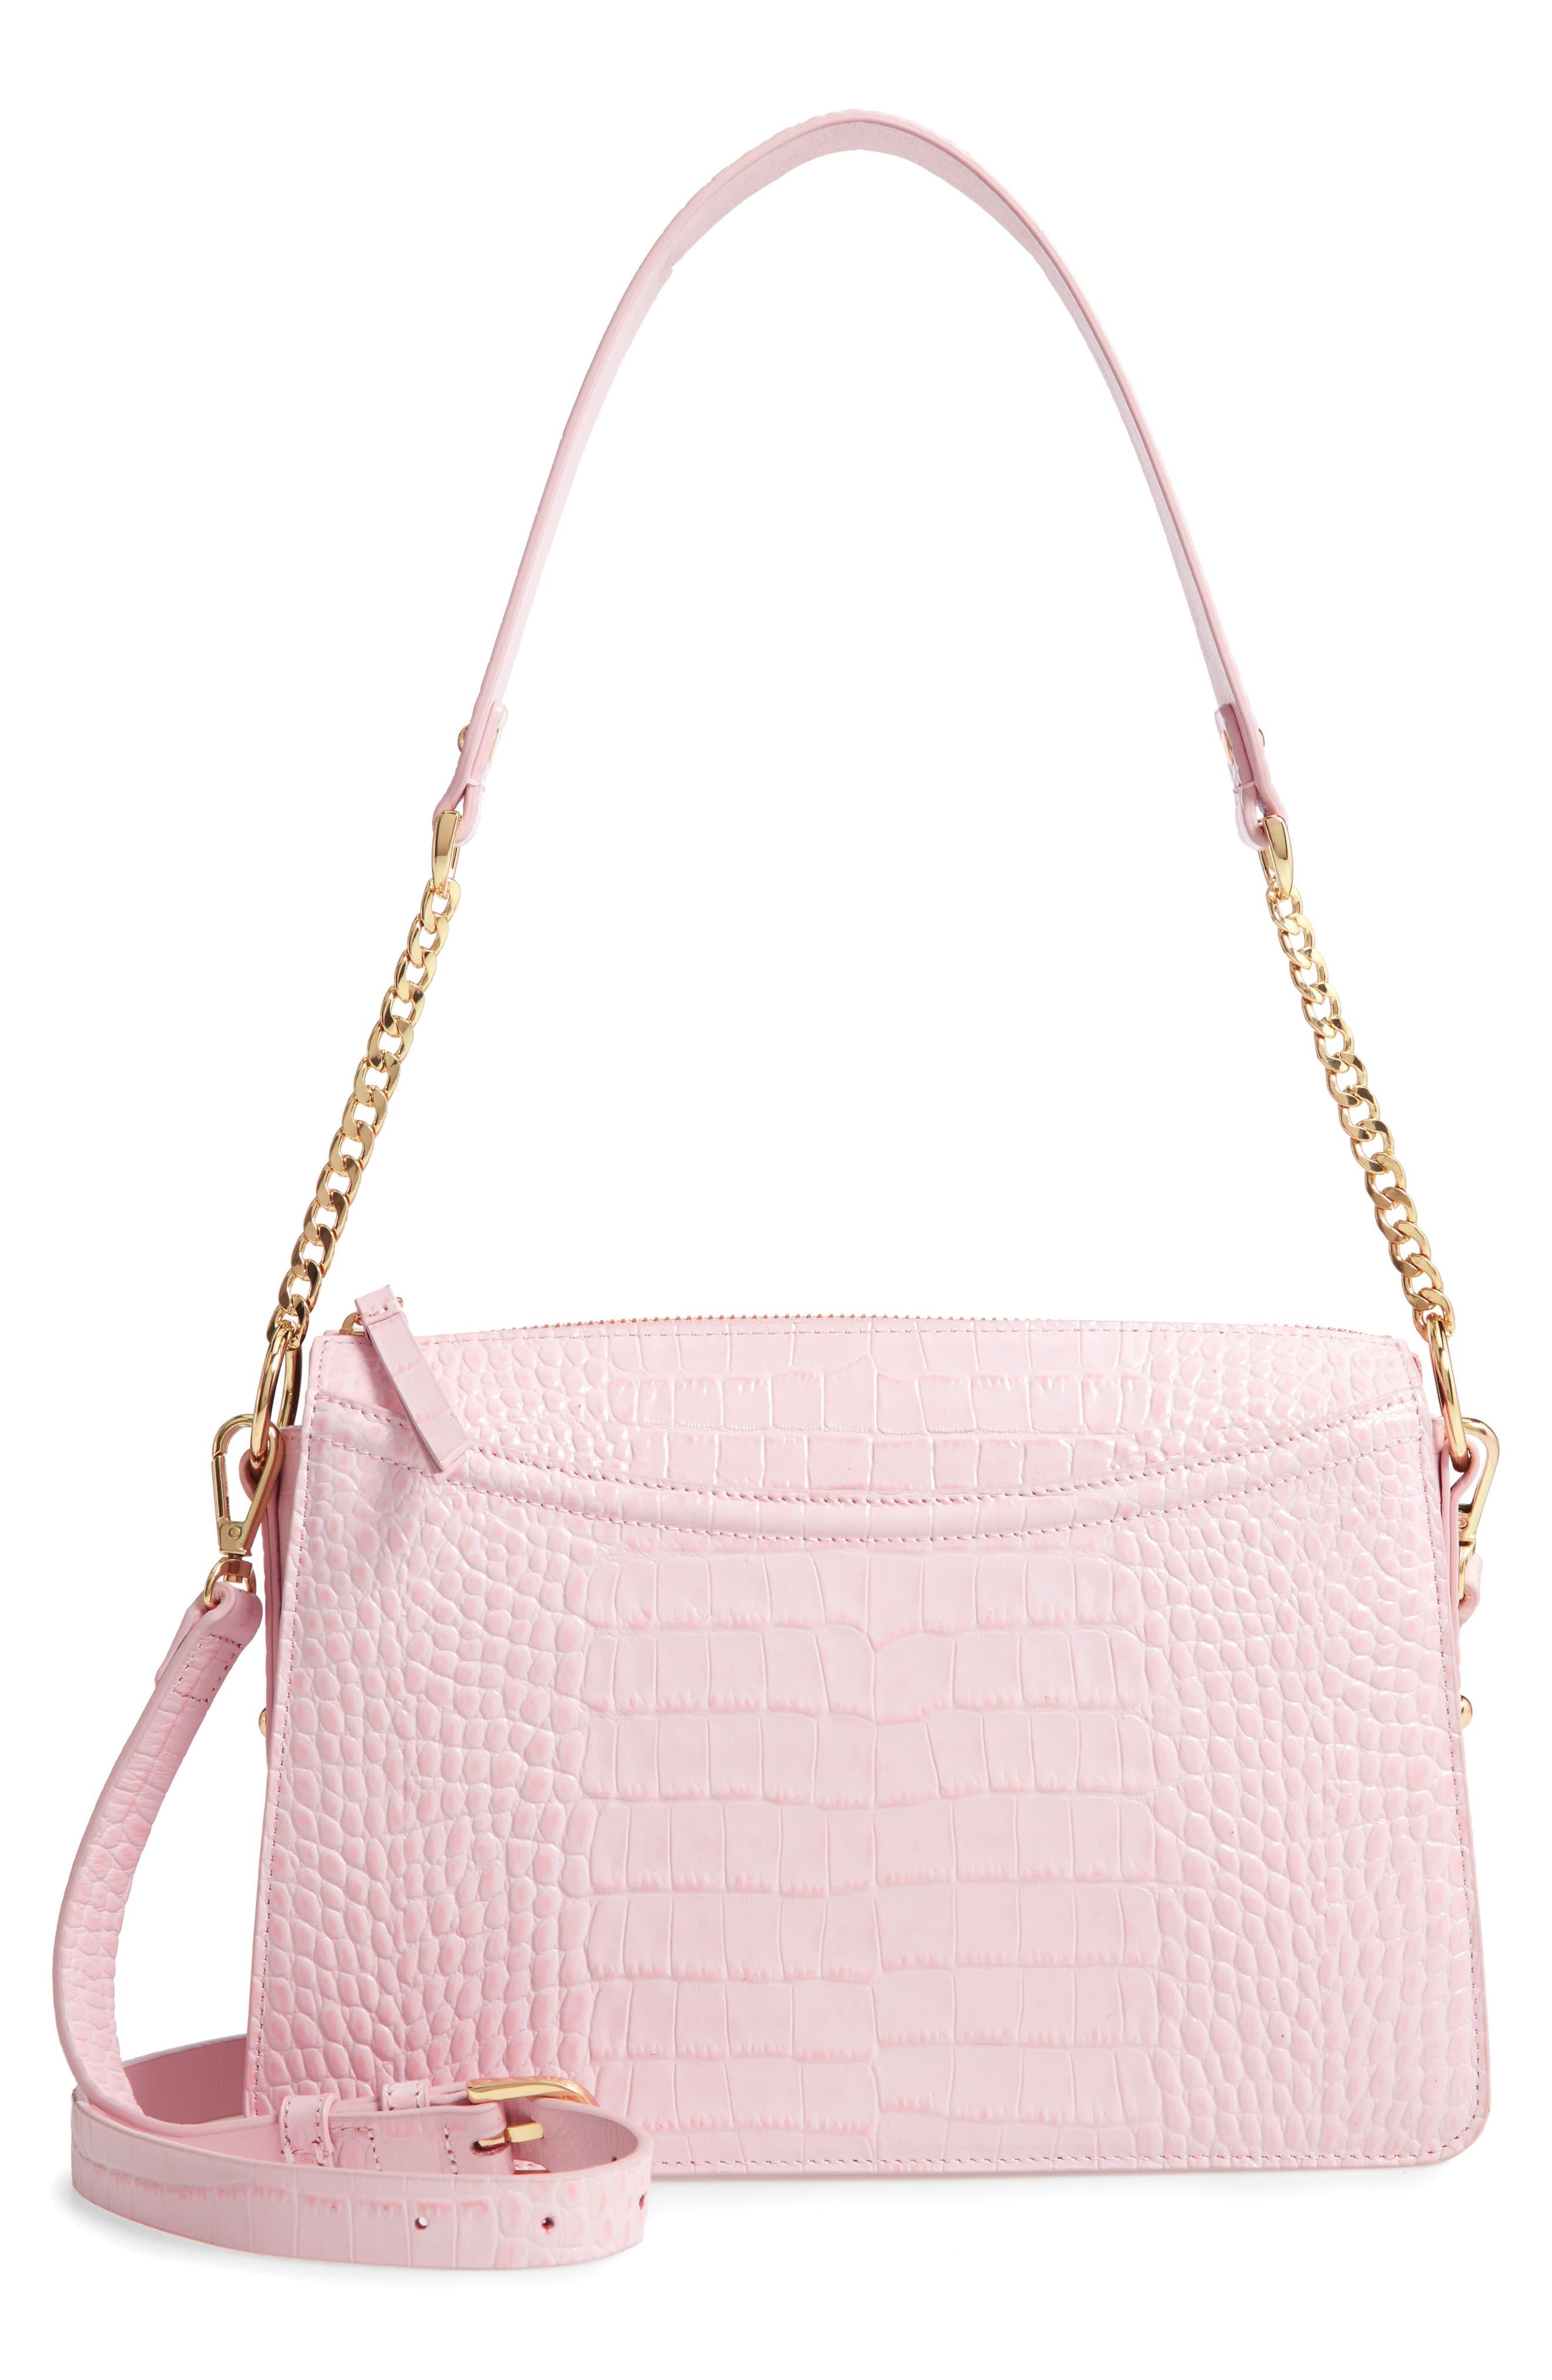 Nordstrom Lola Leather Crossbody Bag in Pink - Lyst